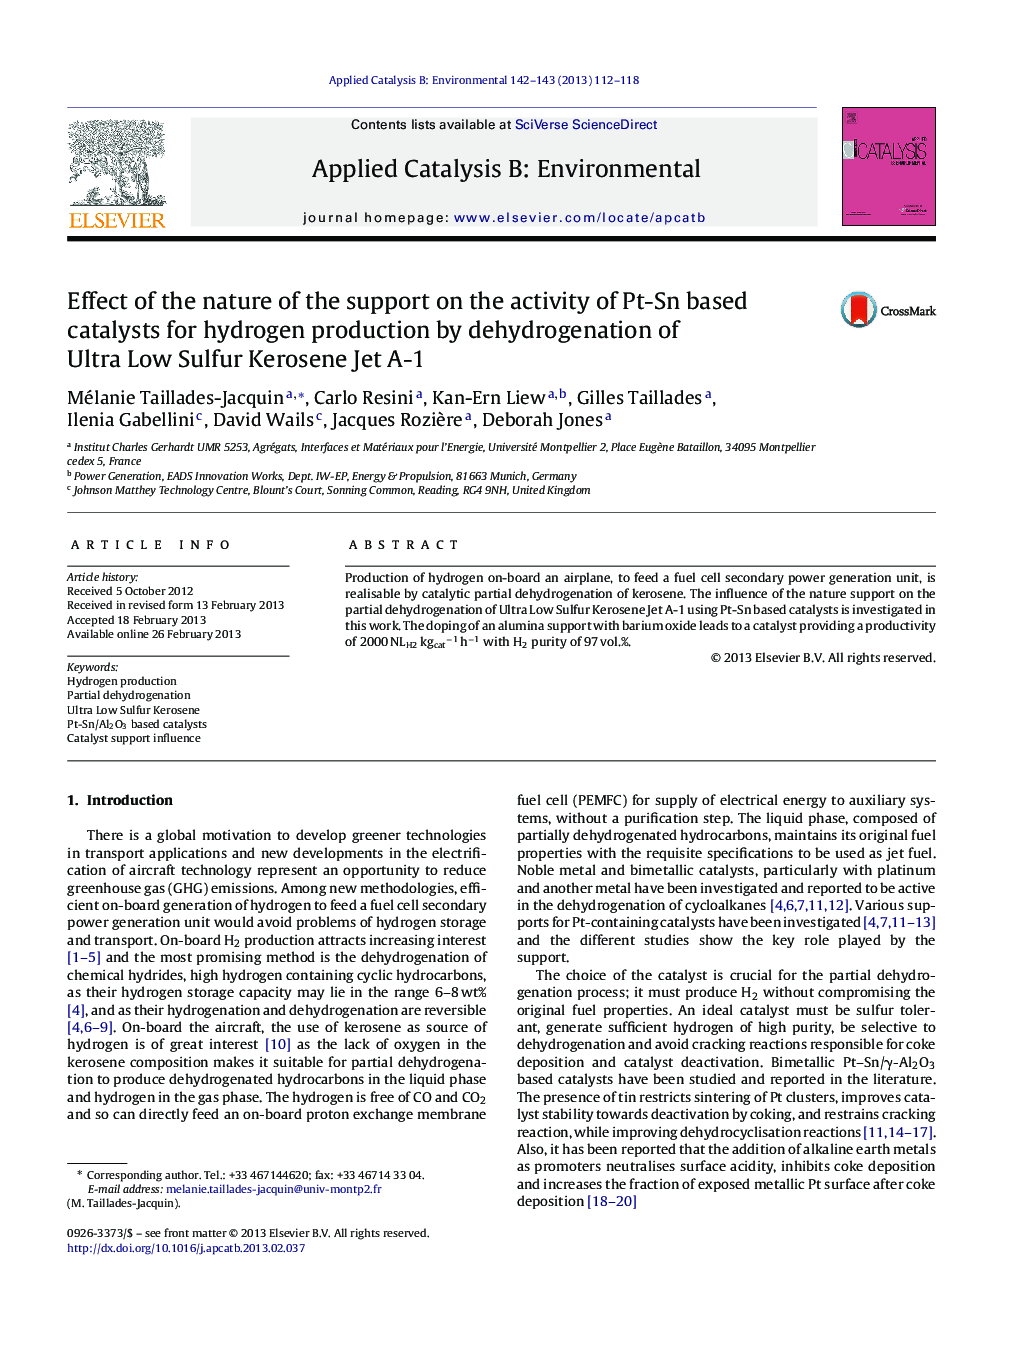 Effect of the nature of the support on the activity of Pt-Sn based catalysts for hydrogen production by dehydrogenation of Ultra Low Sulfur Kerosene Jet A-1